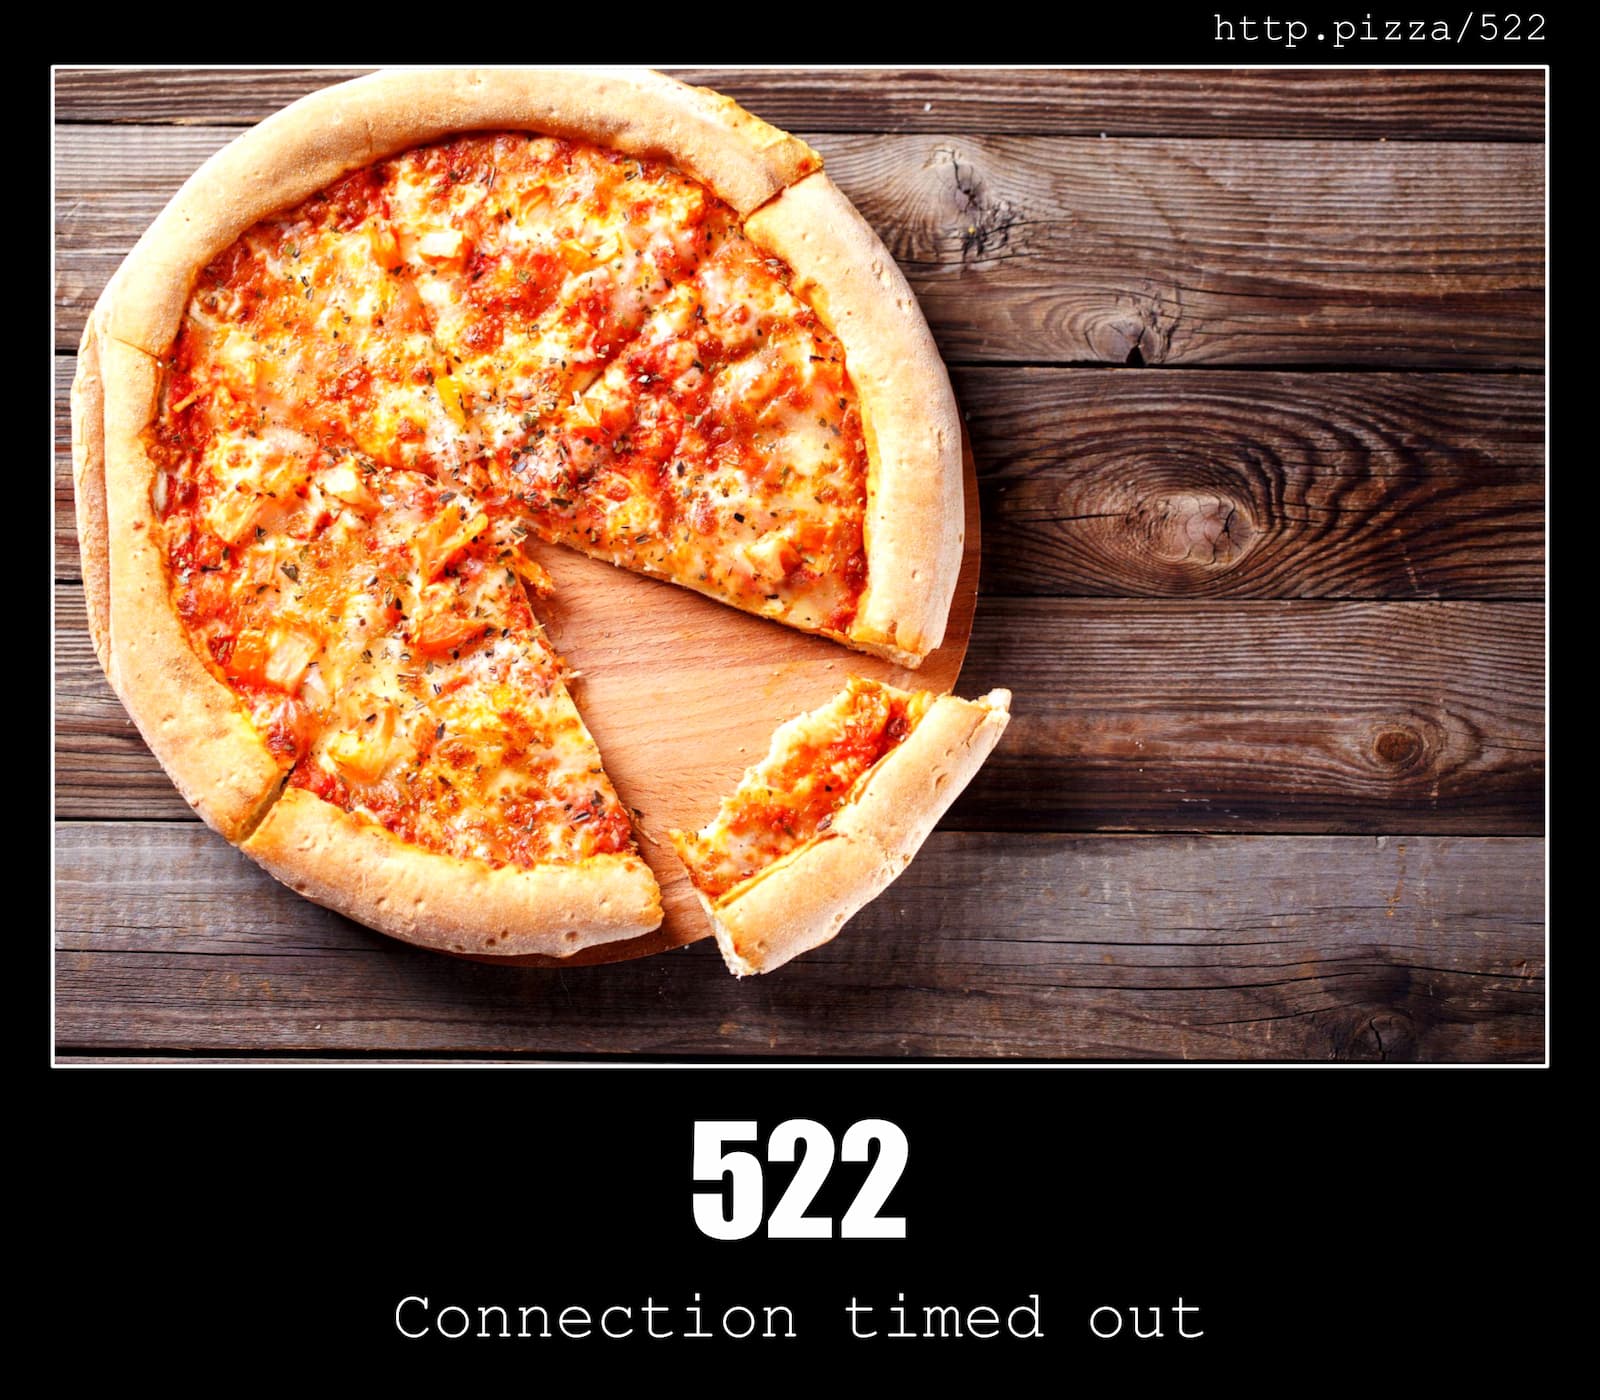 HTTP Status Code 522 Connection timed out & Pizzas